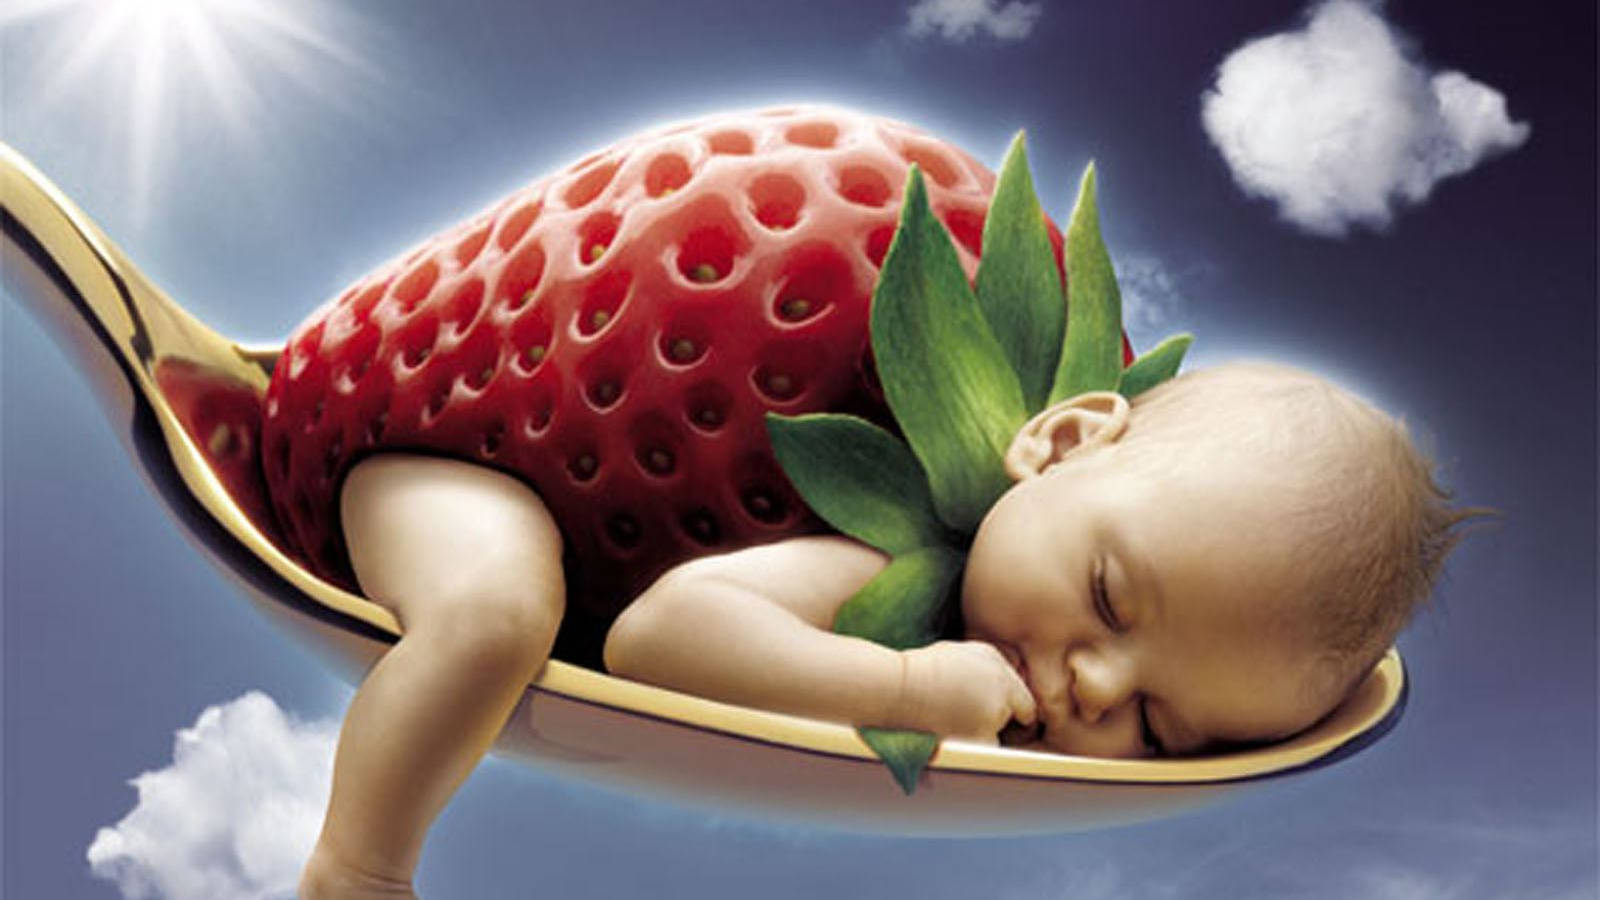 Adorable Baby In A Strawberry Outfit Laughing Joyously Background